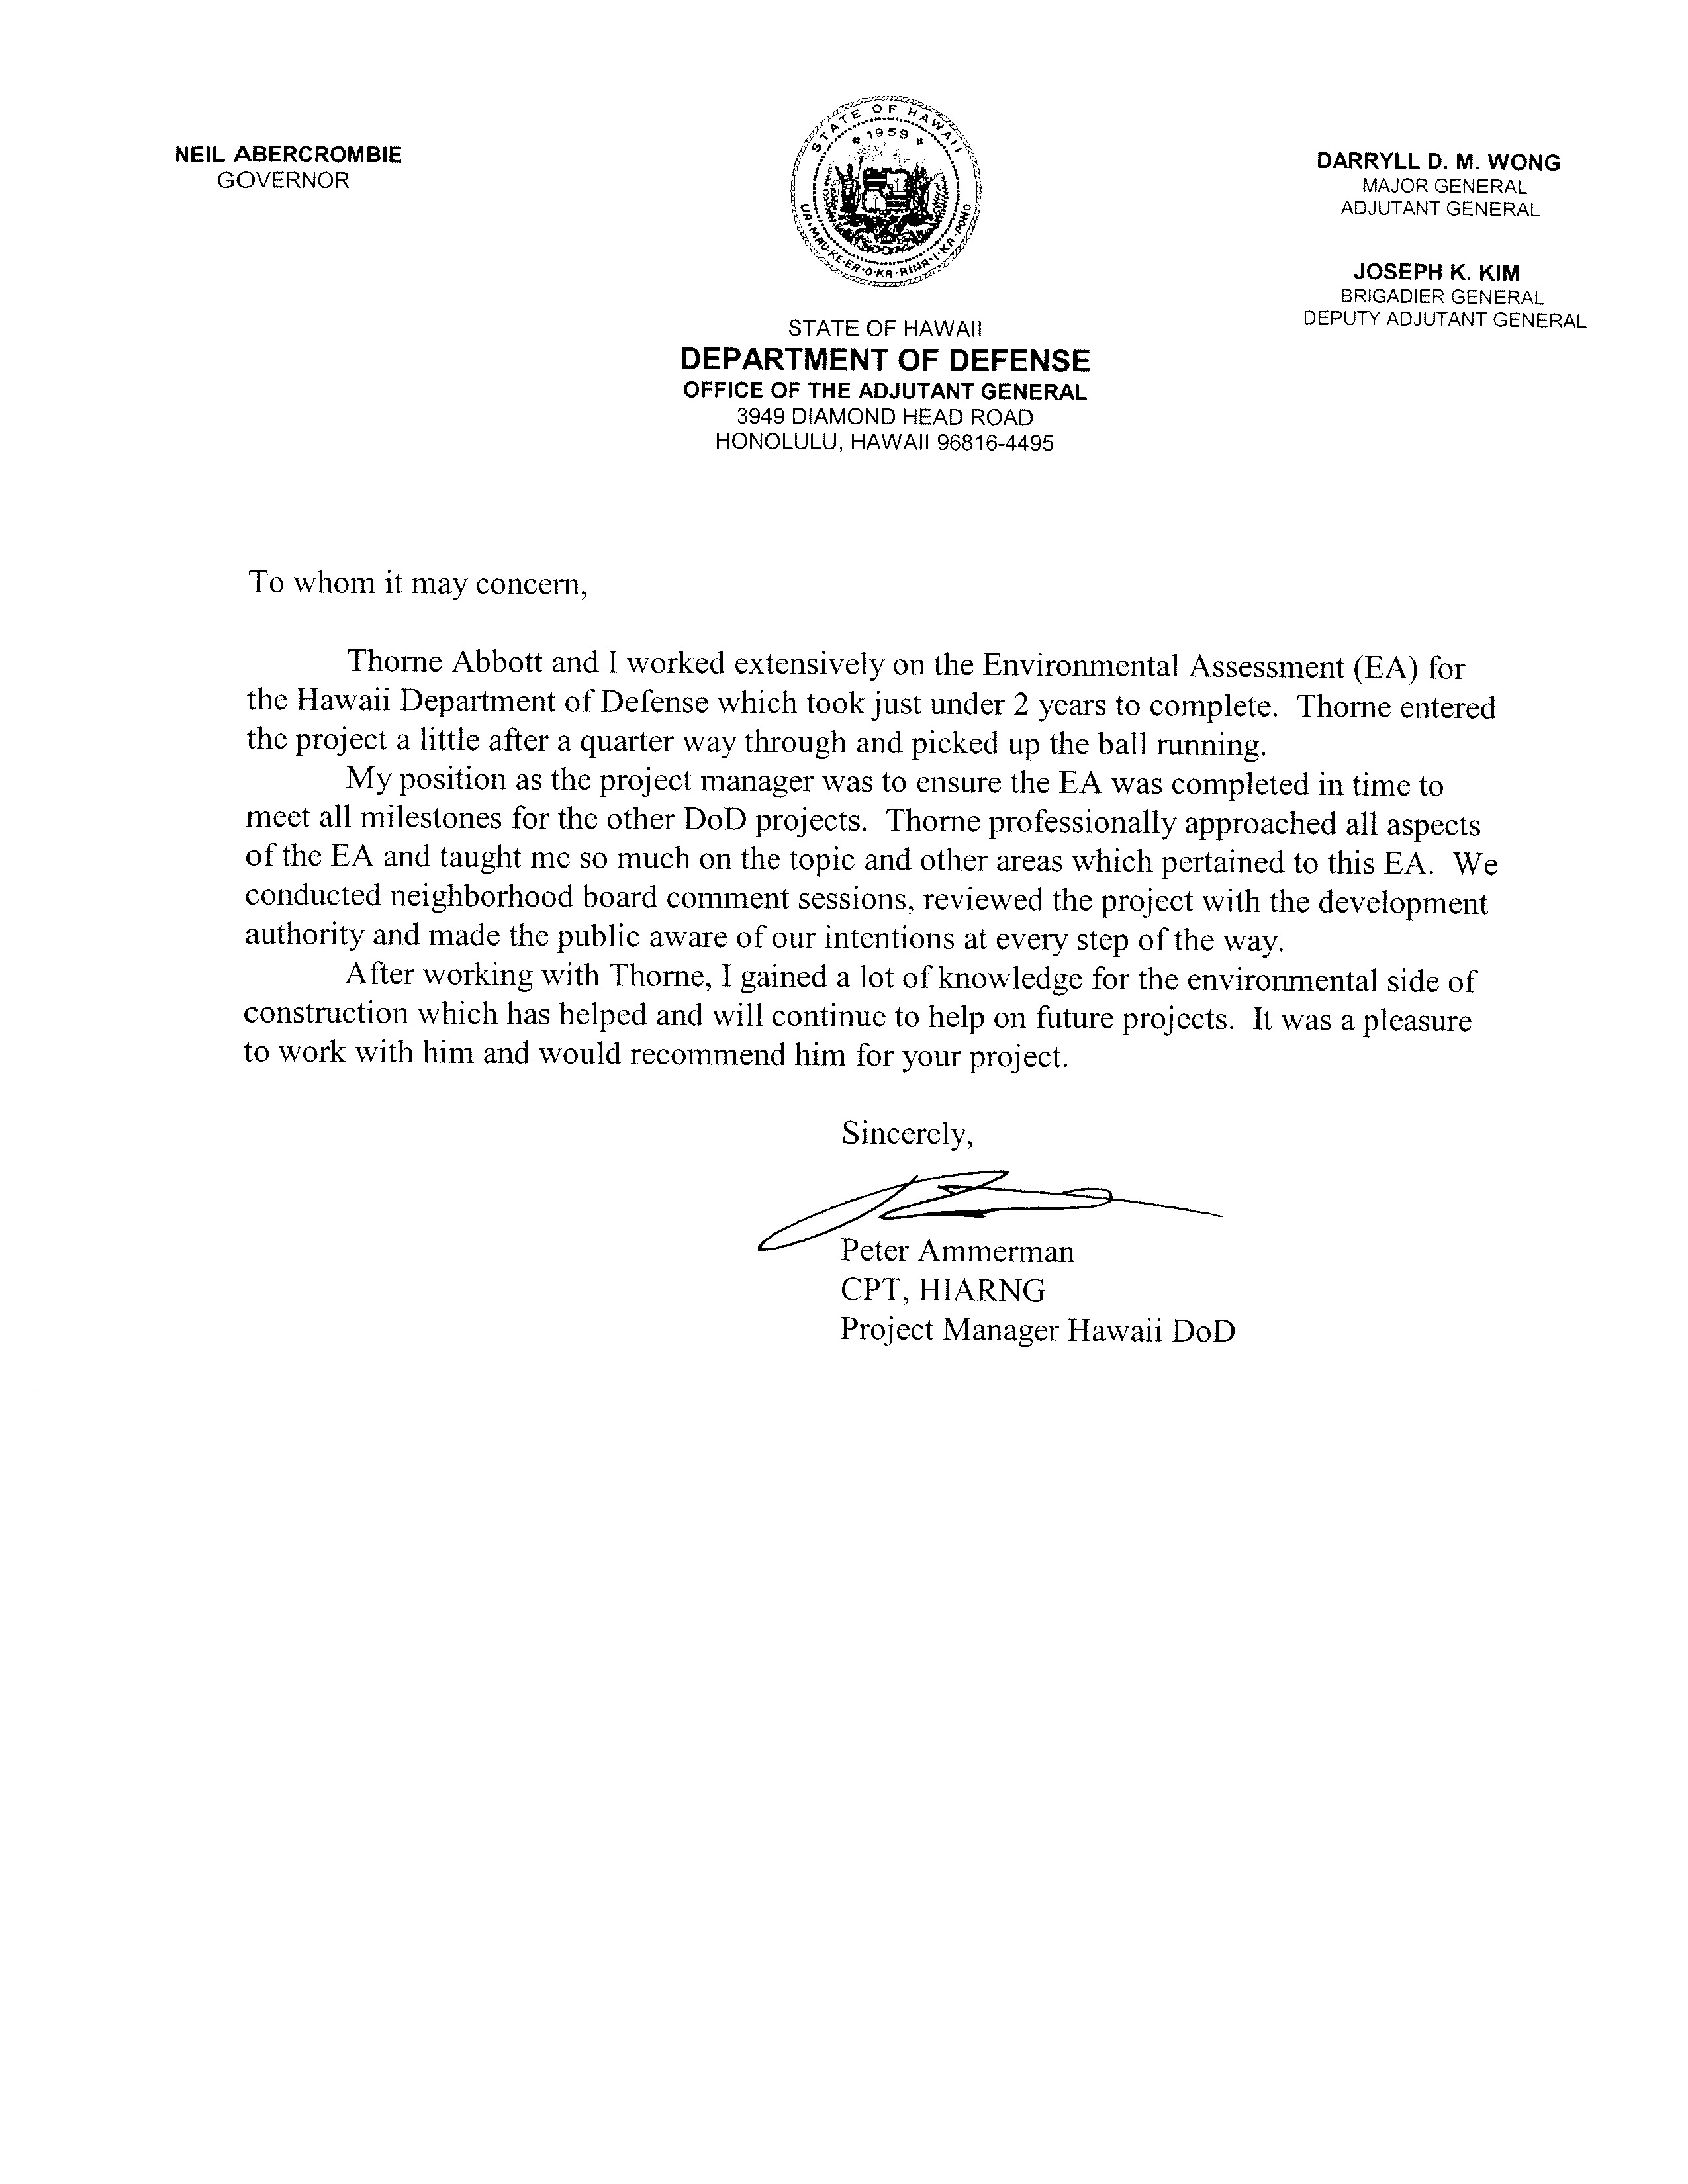 HIARNG Letter of Recommendation